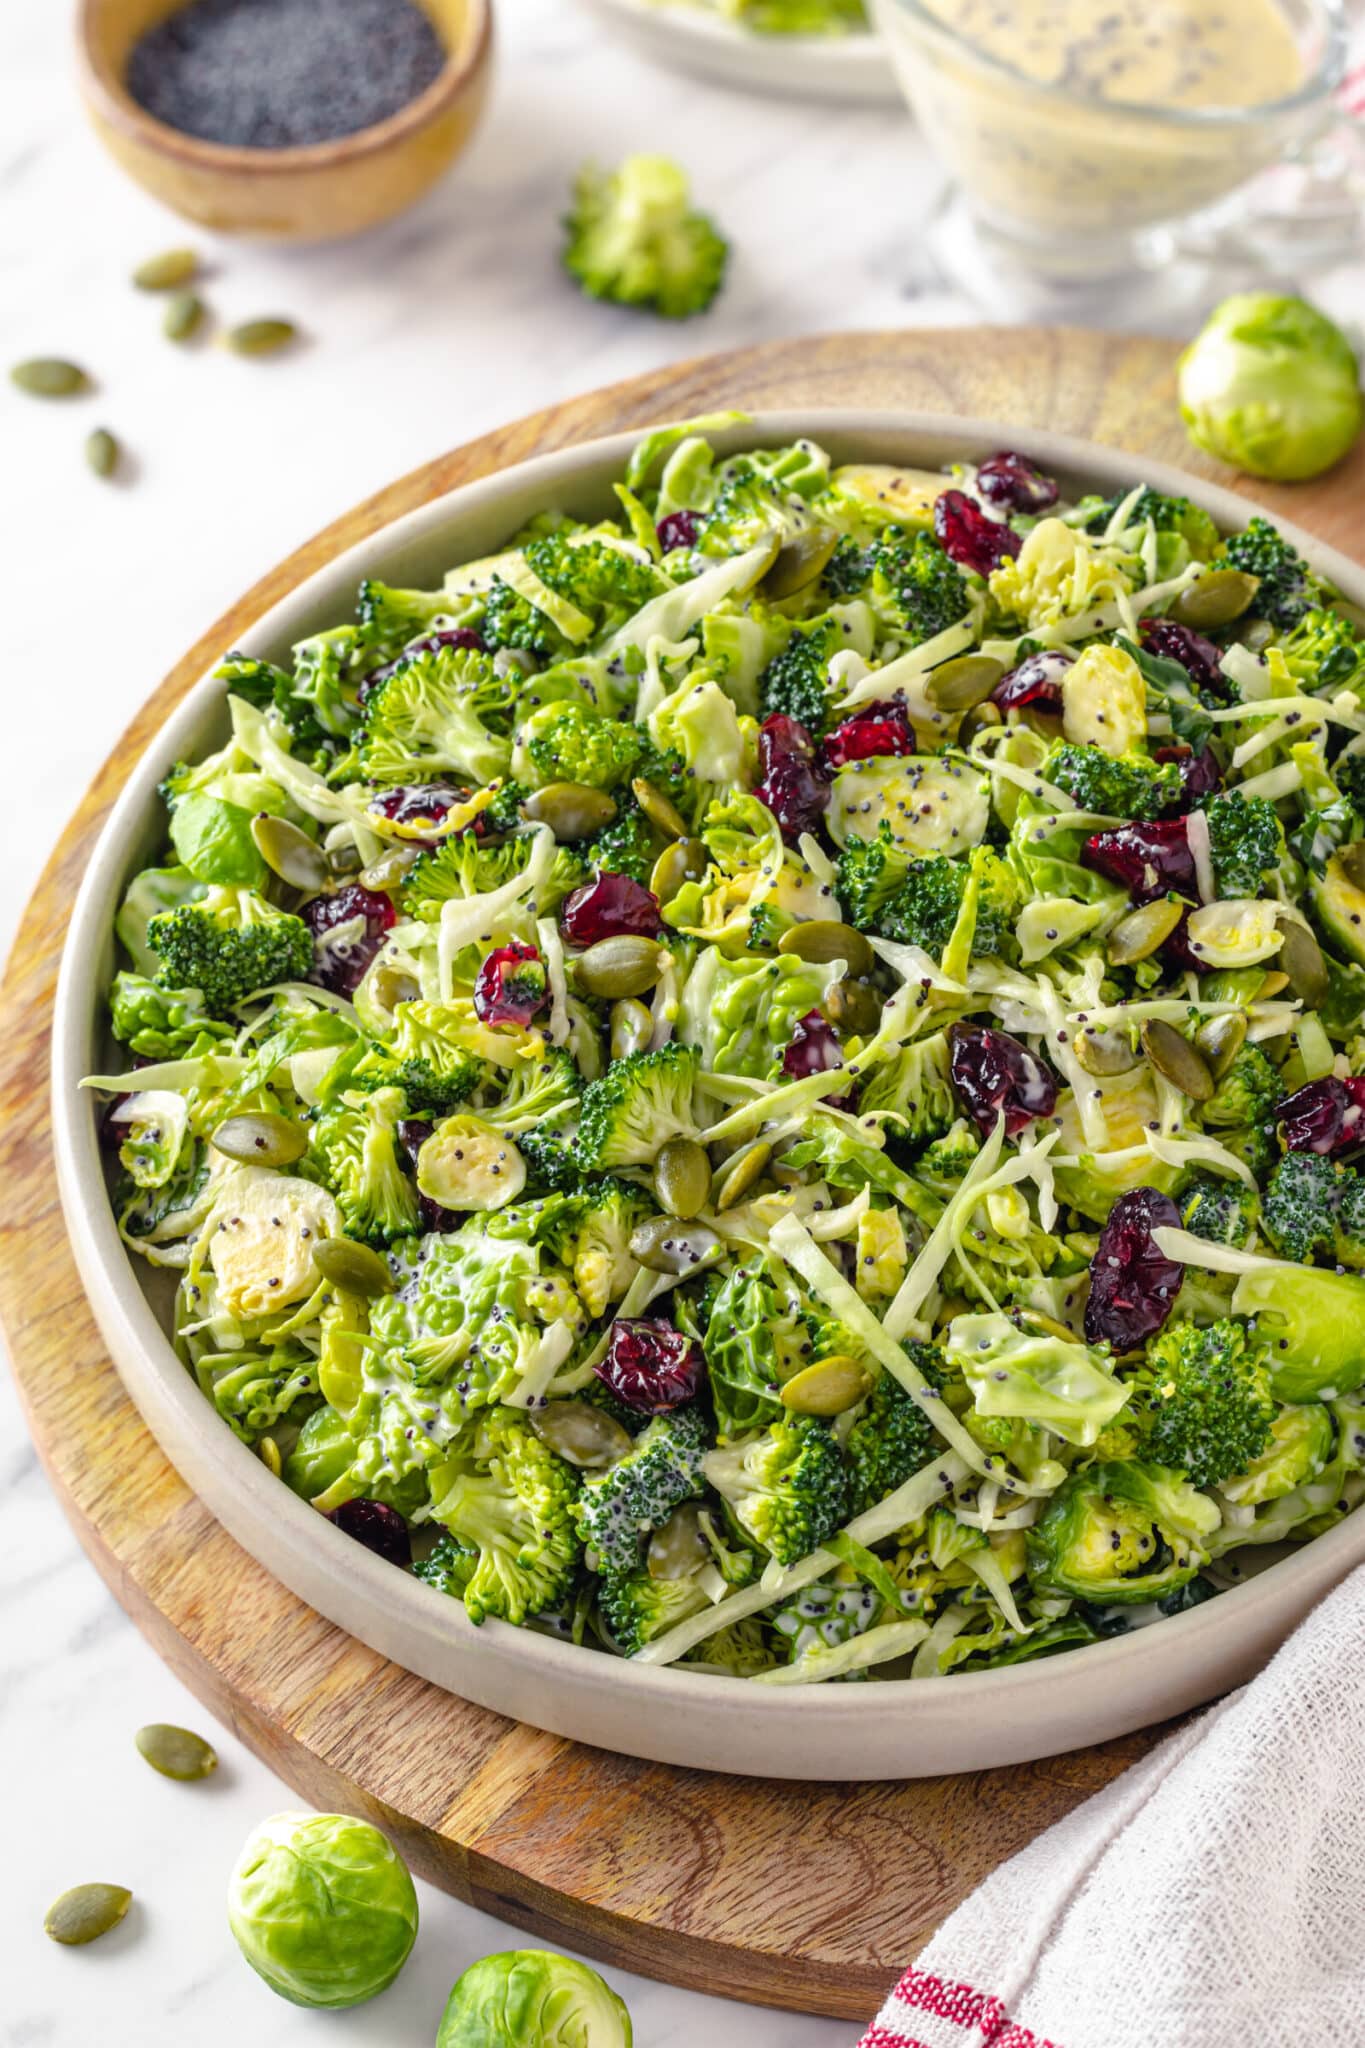 Superfood Salad with a Simple Poppy Seed Dressing